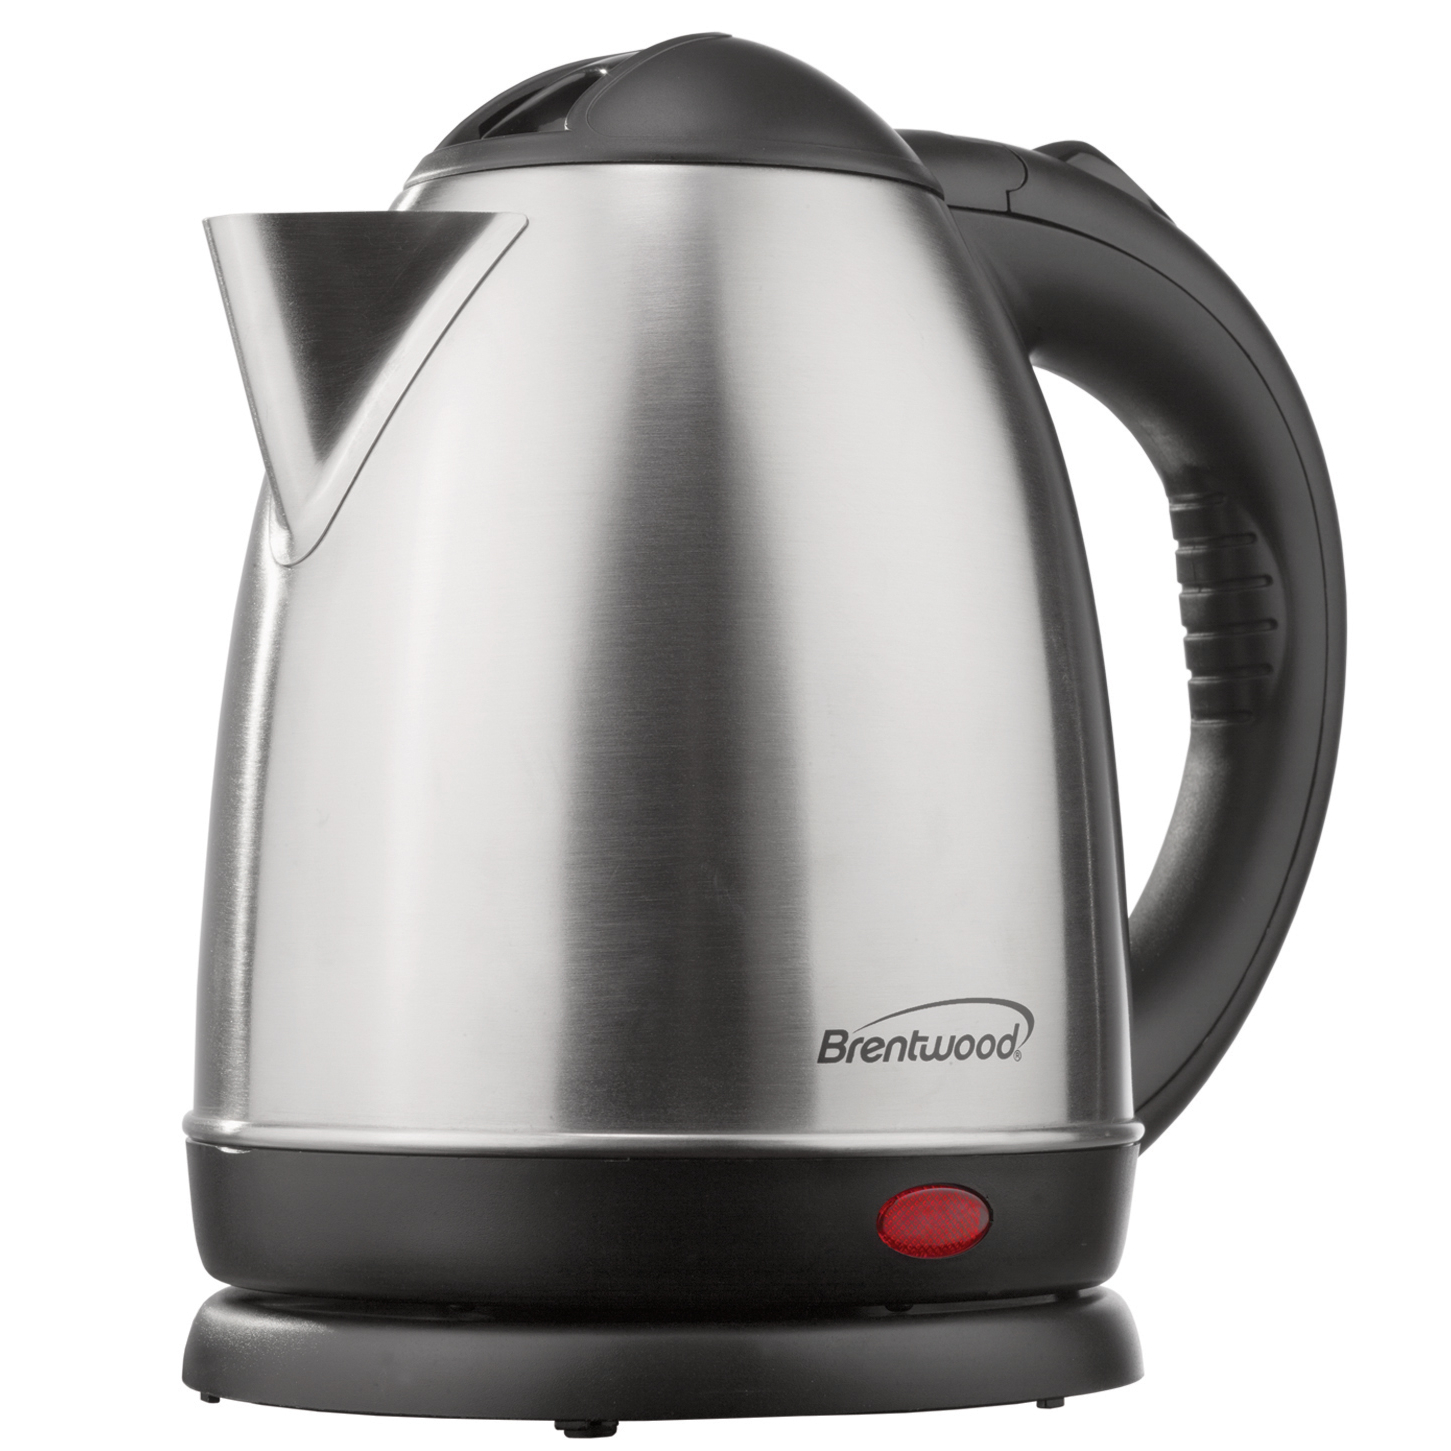 BRENTWOOD 1.5L STAINLESS STEEL ELECTRIC CORDLESS TEA KETTLE 1000W- BRUSHED